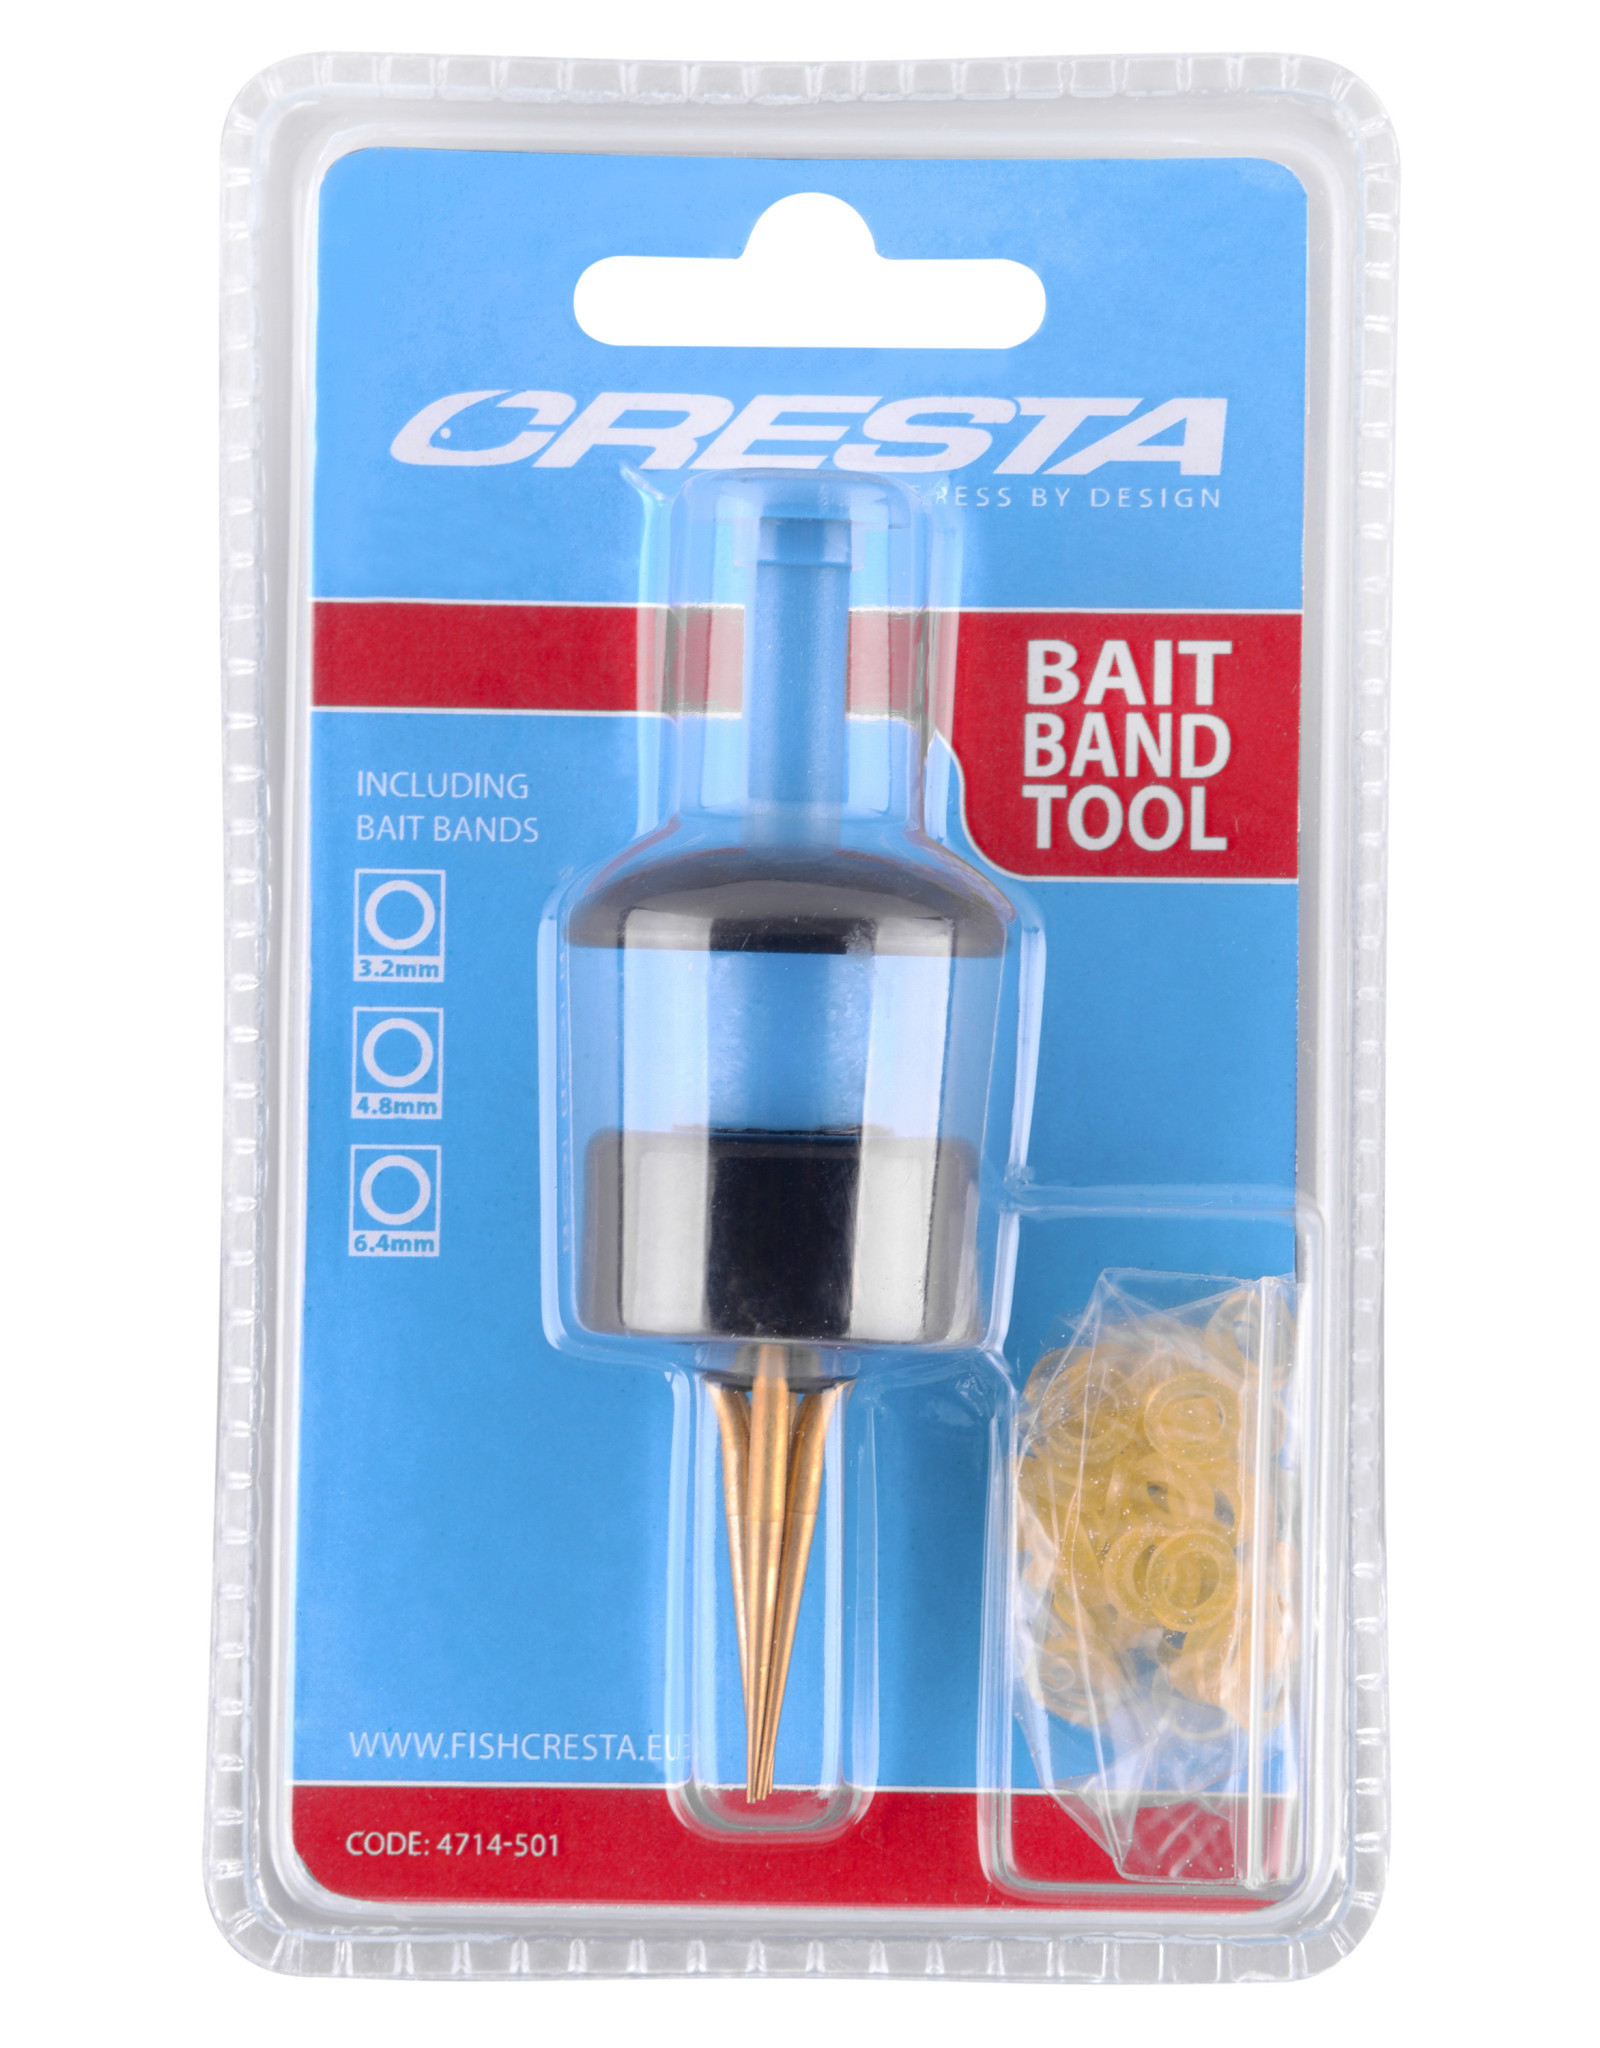 Cresta BAIT BAND TOOL (INCL.BANDS)